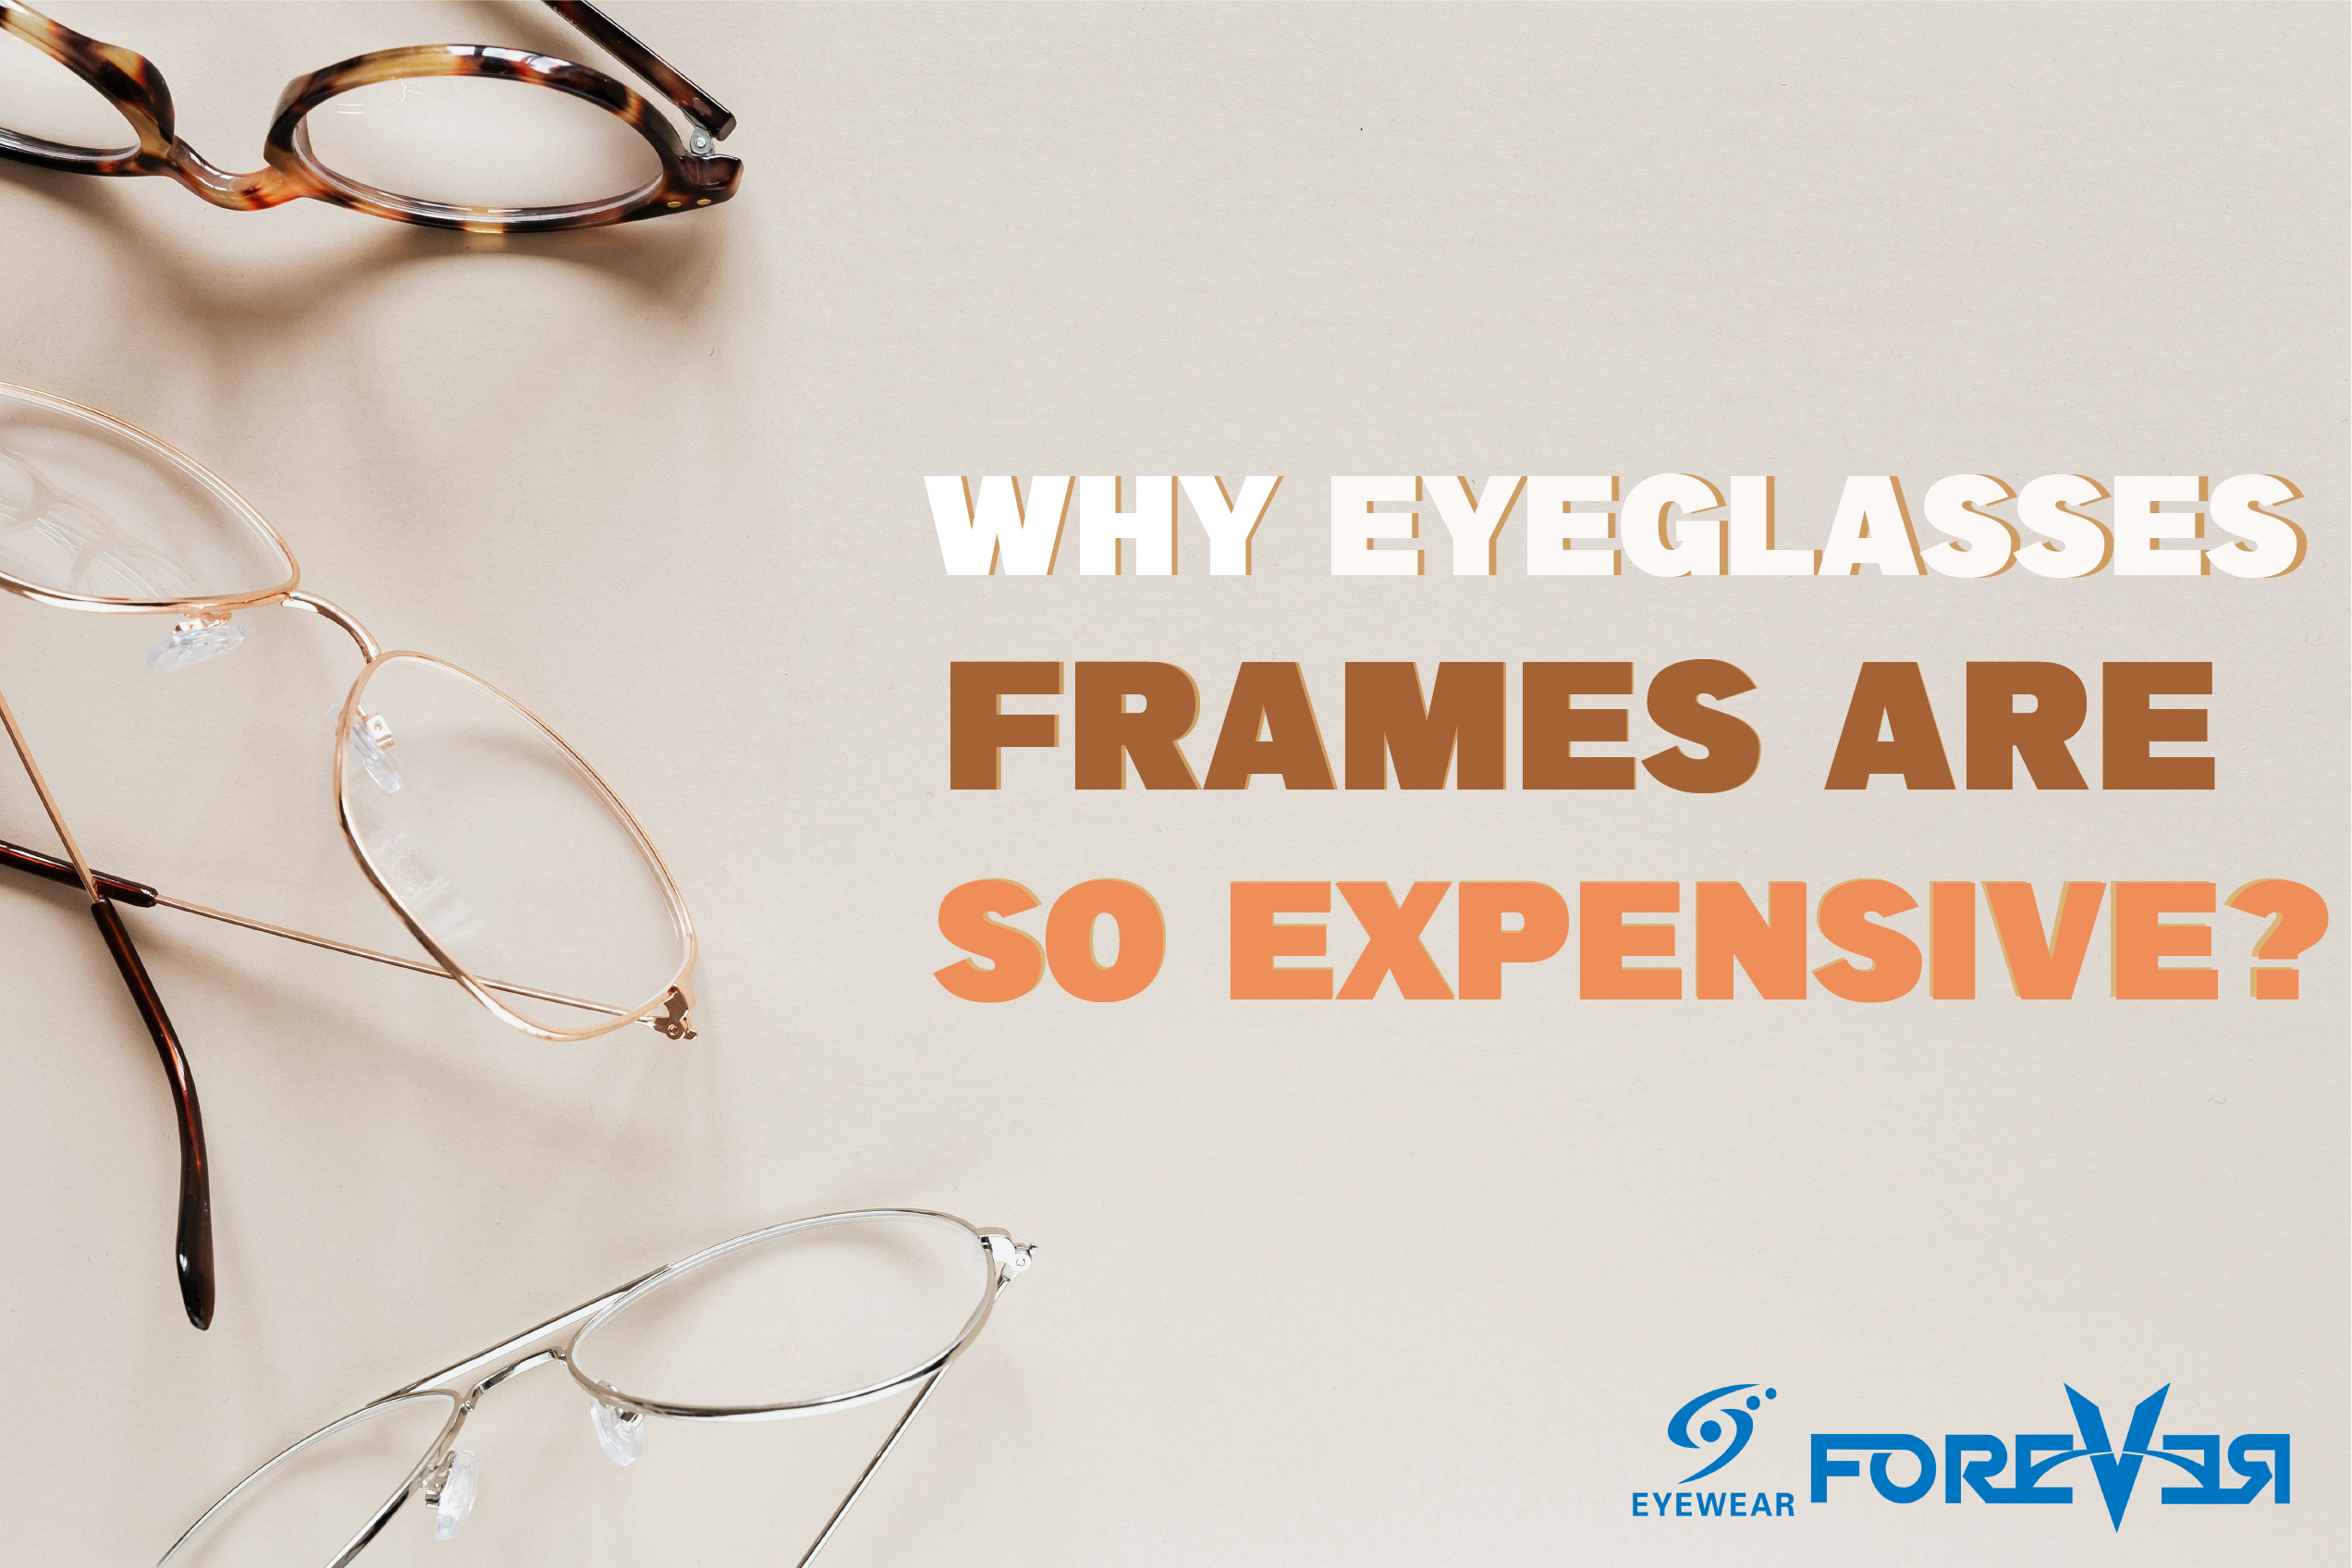 Why Some Eyeglasses Frames are Expensive?